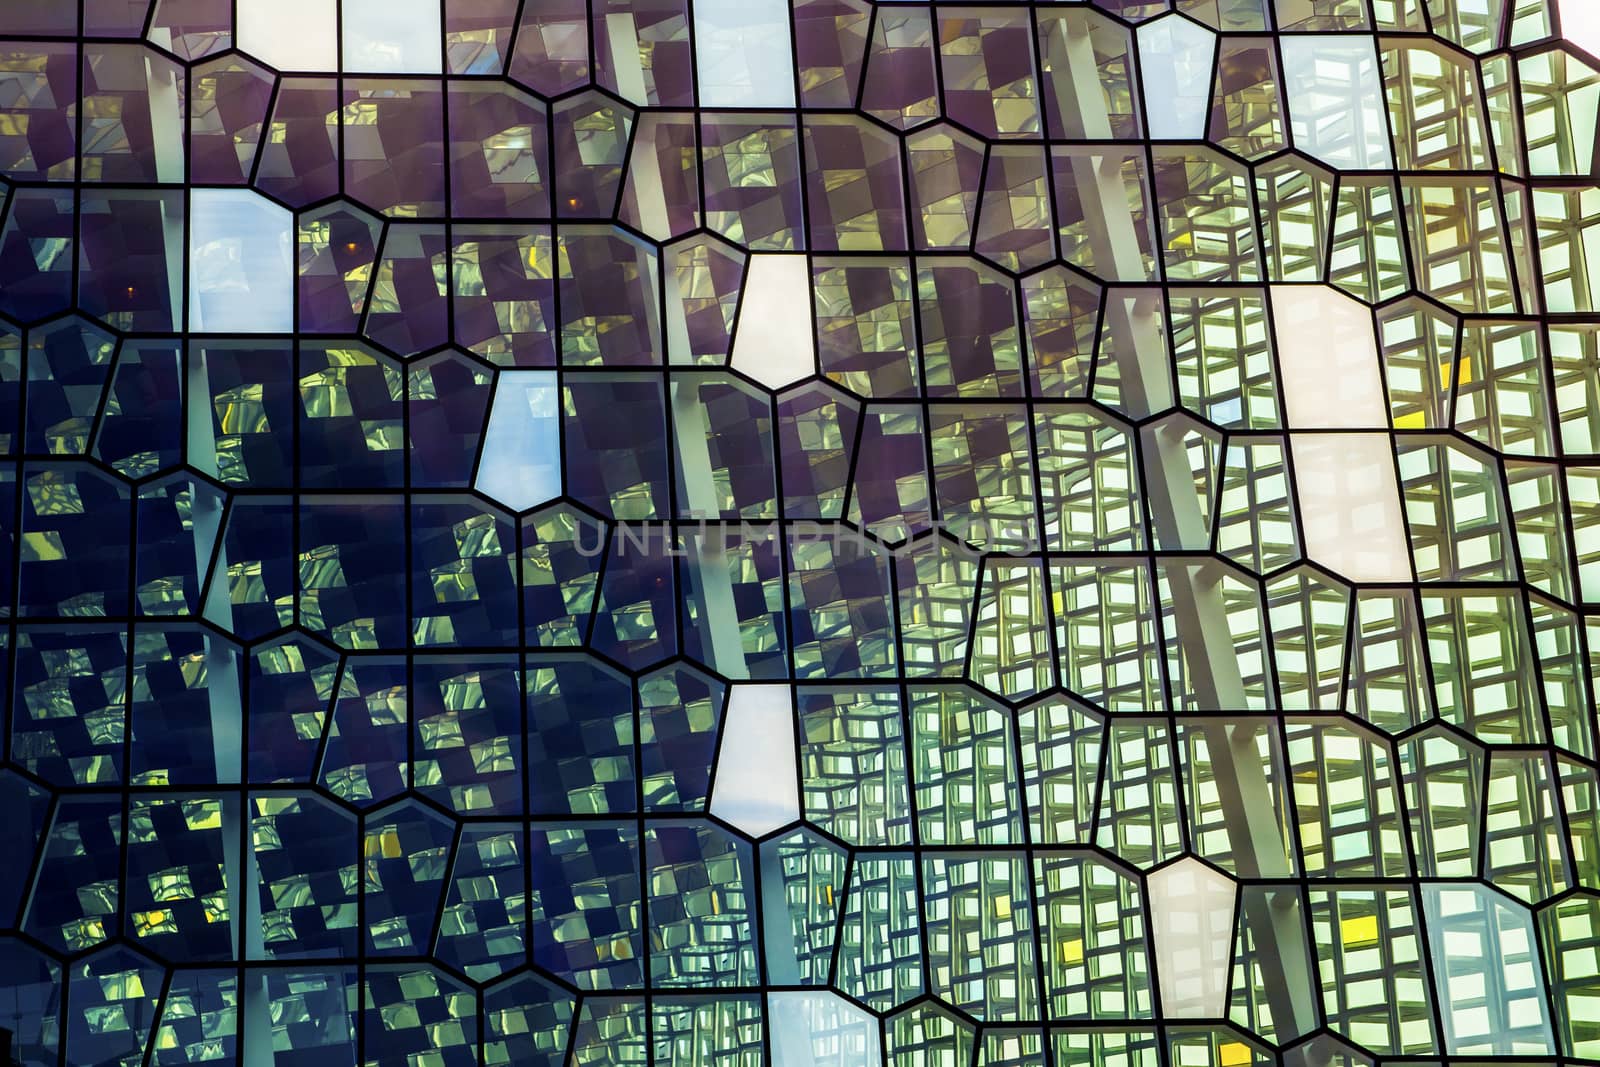 Reykjavik, Iceland, July 2019: Architecture close-up and detail of the Glass window design of the Harpa concert hall and conference centre